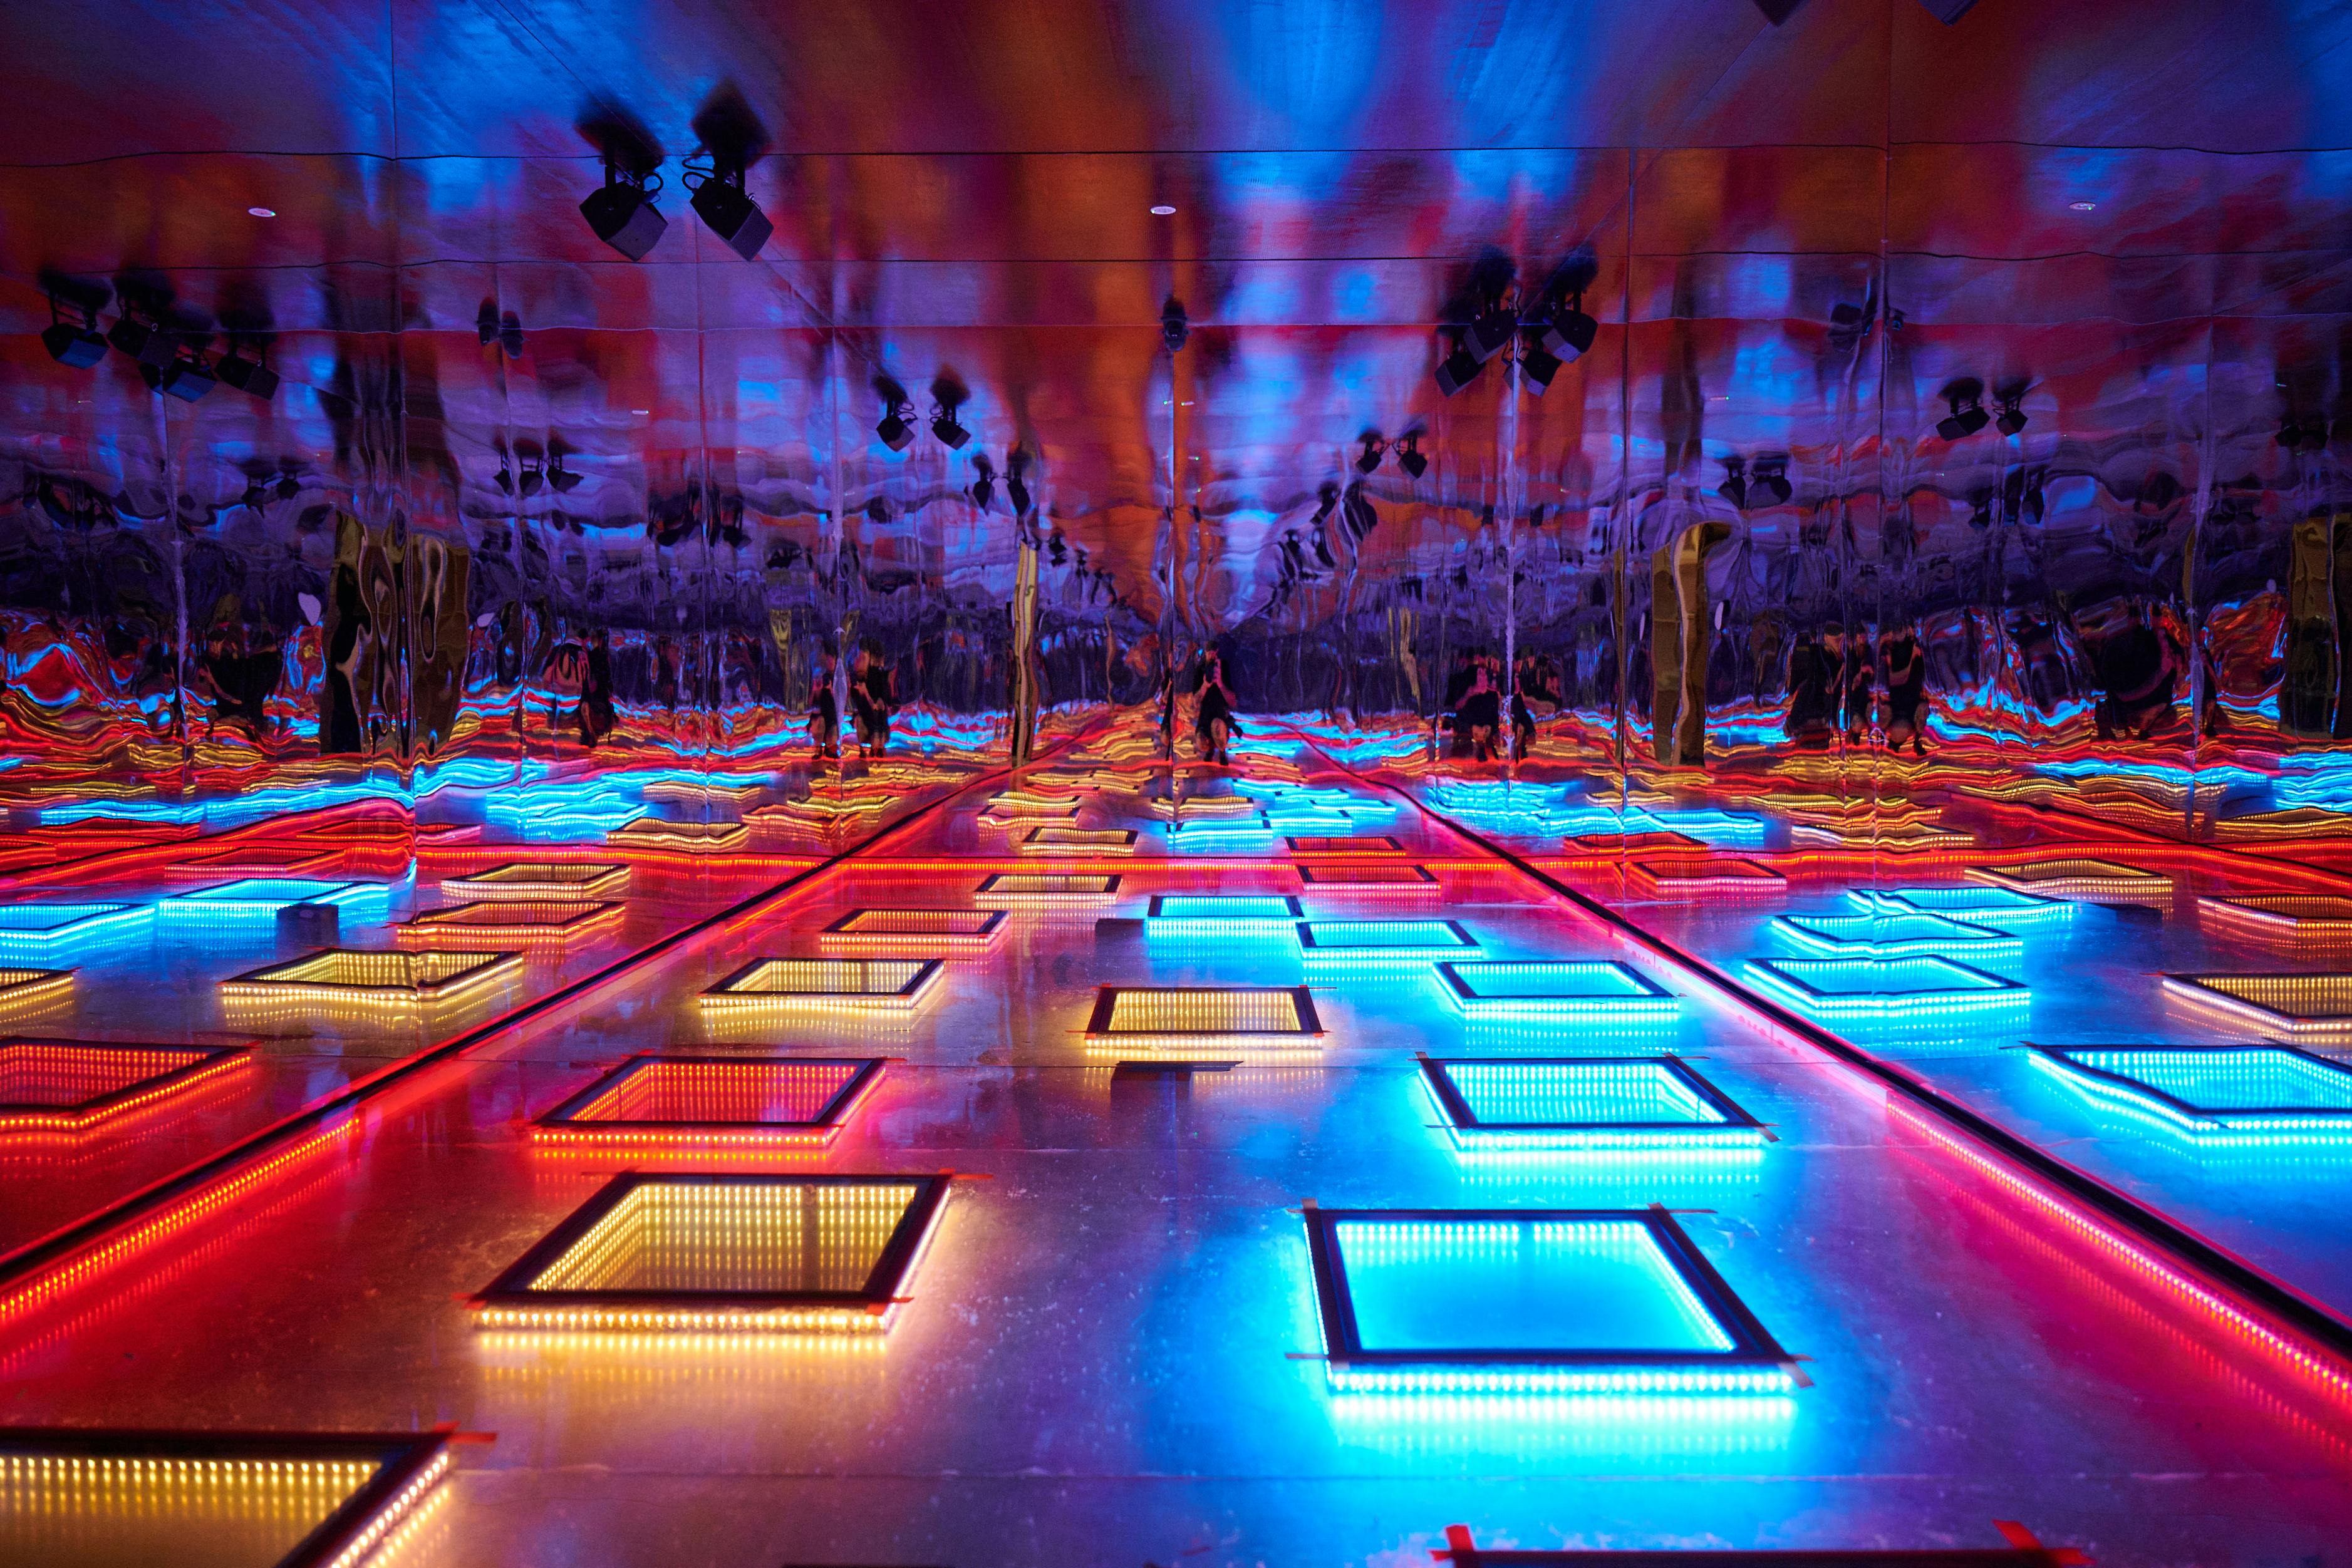 Light filled squares spread across the ground as part of an art exhibition at Uptown Brisbane